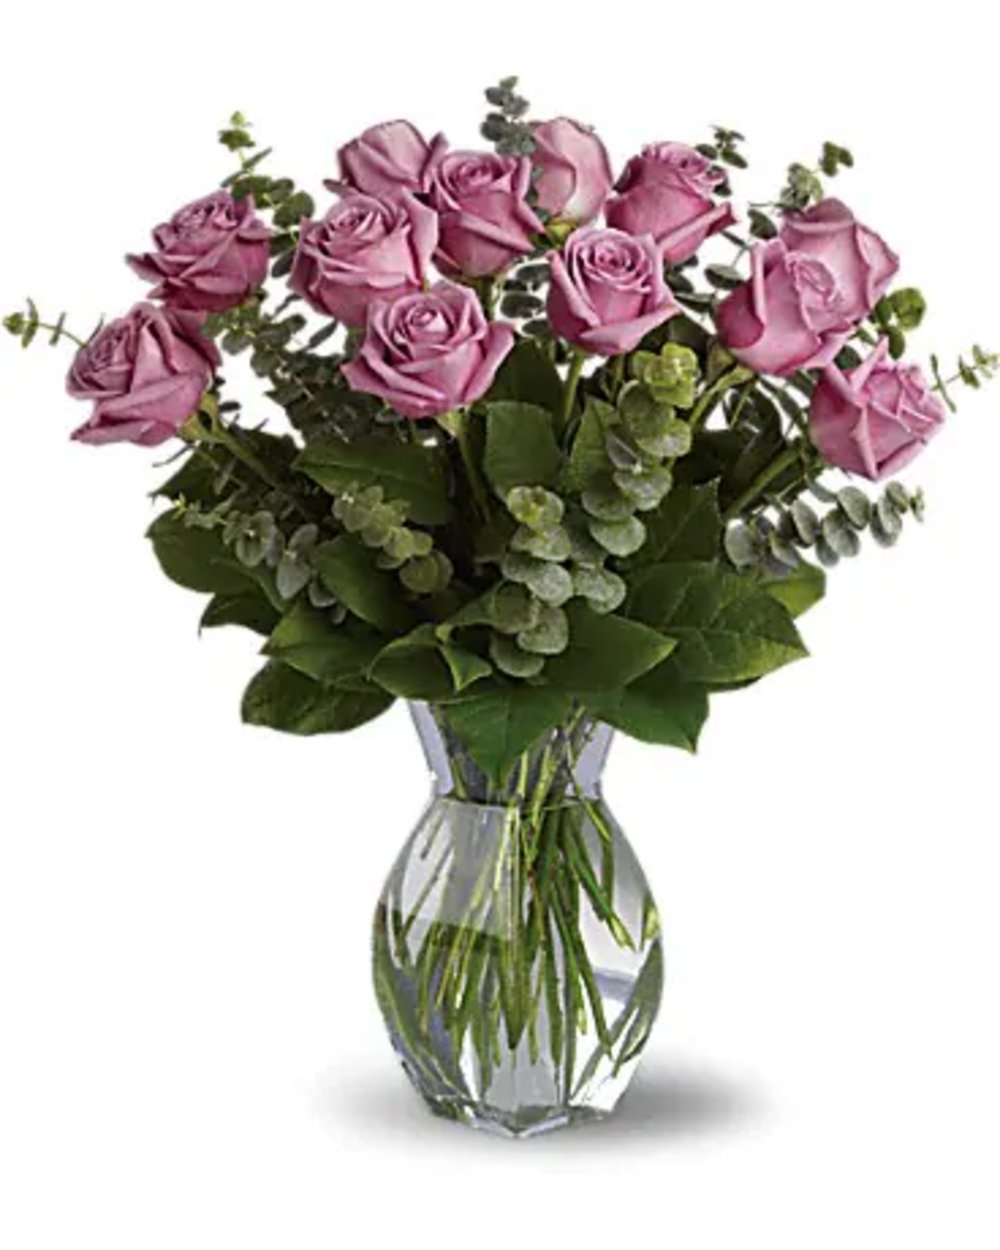 Vase with Stems of Purple Roses